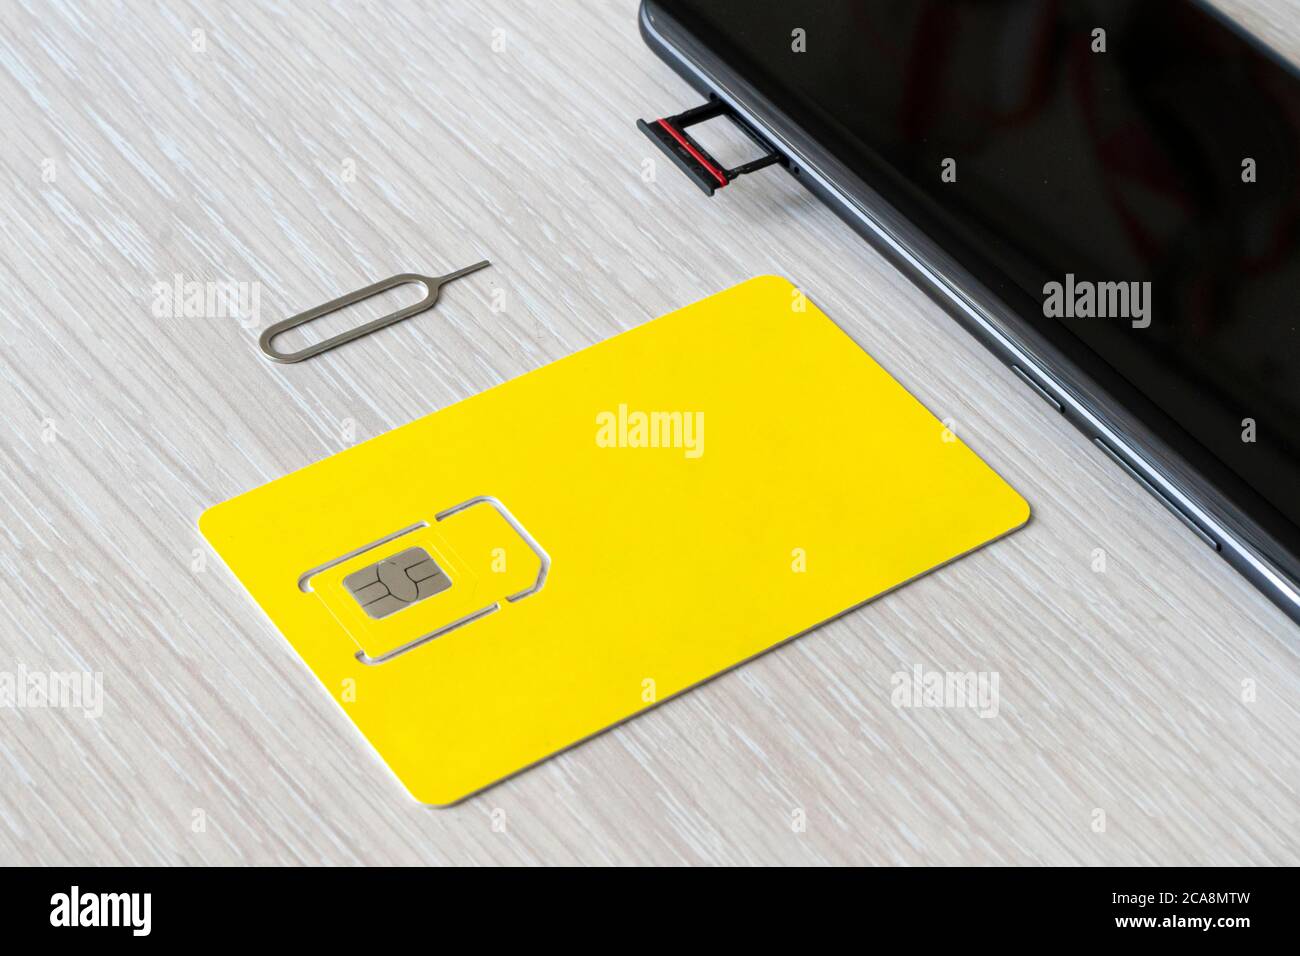 Replacement of nano sim card chip in modern smartphone, Close-up view. copyspace, empty space for design and lettering Stock Photo